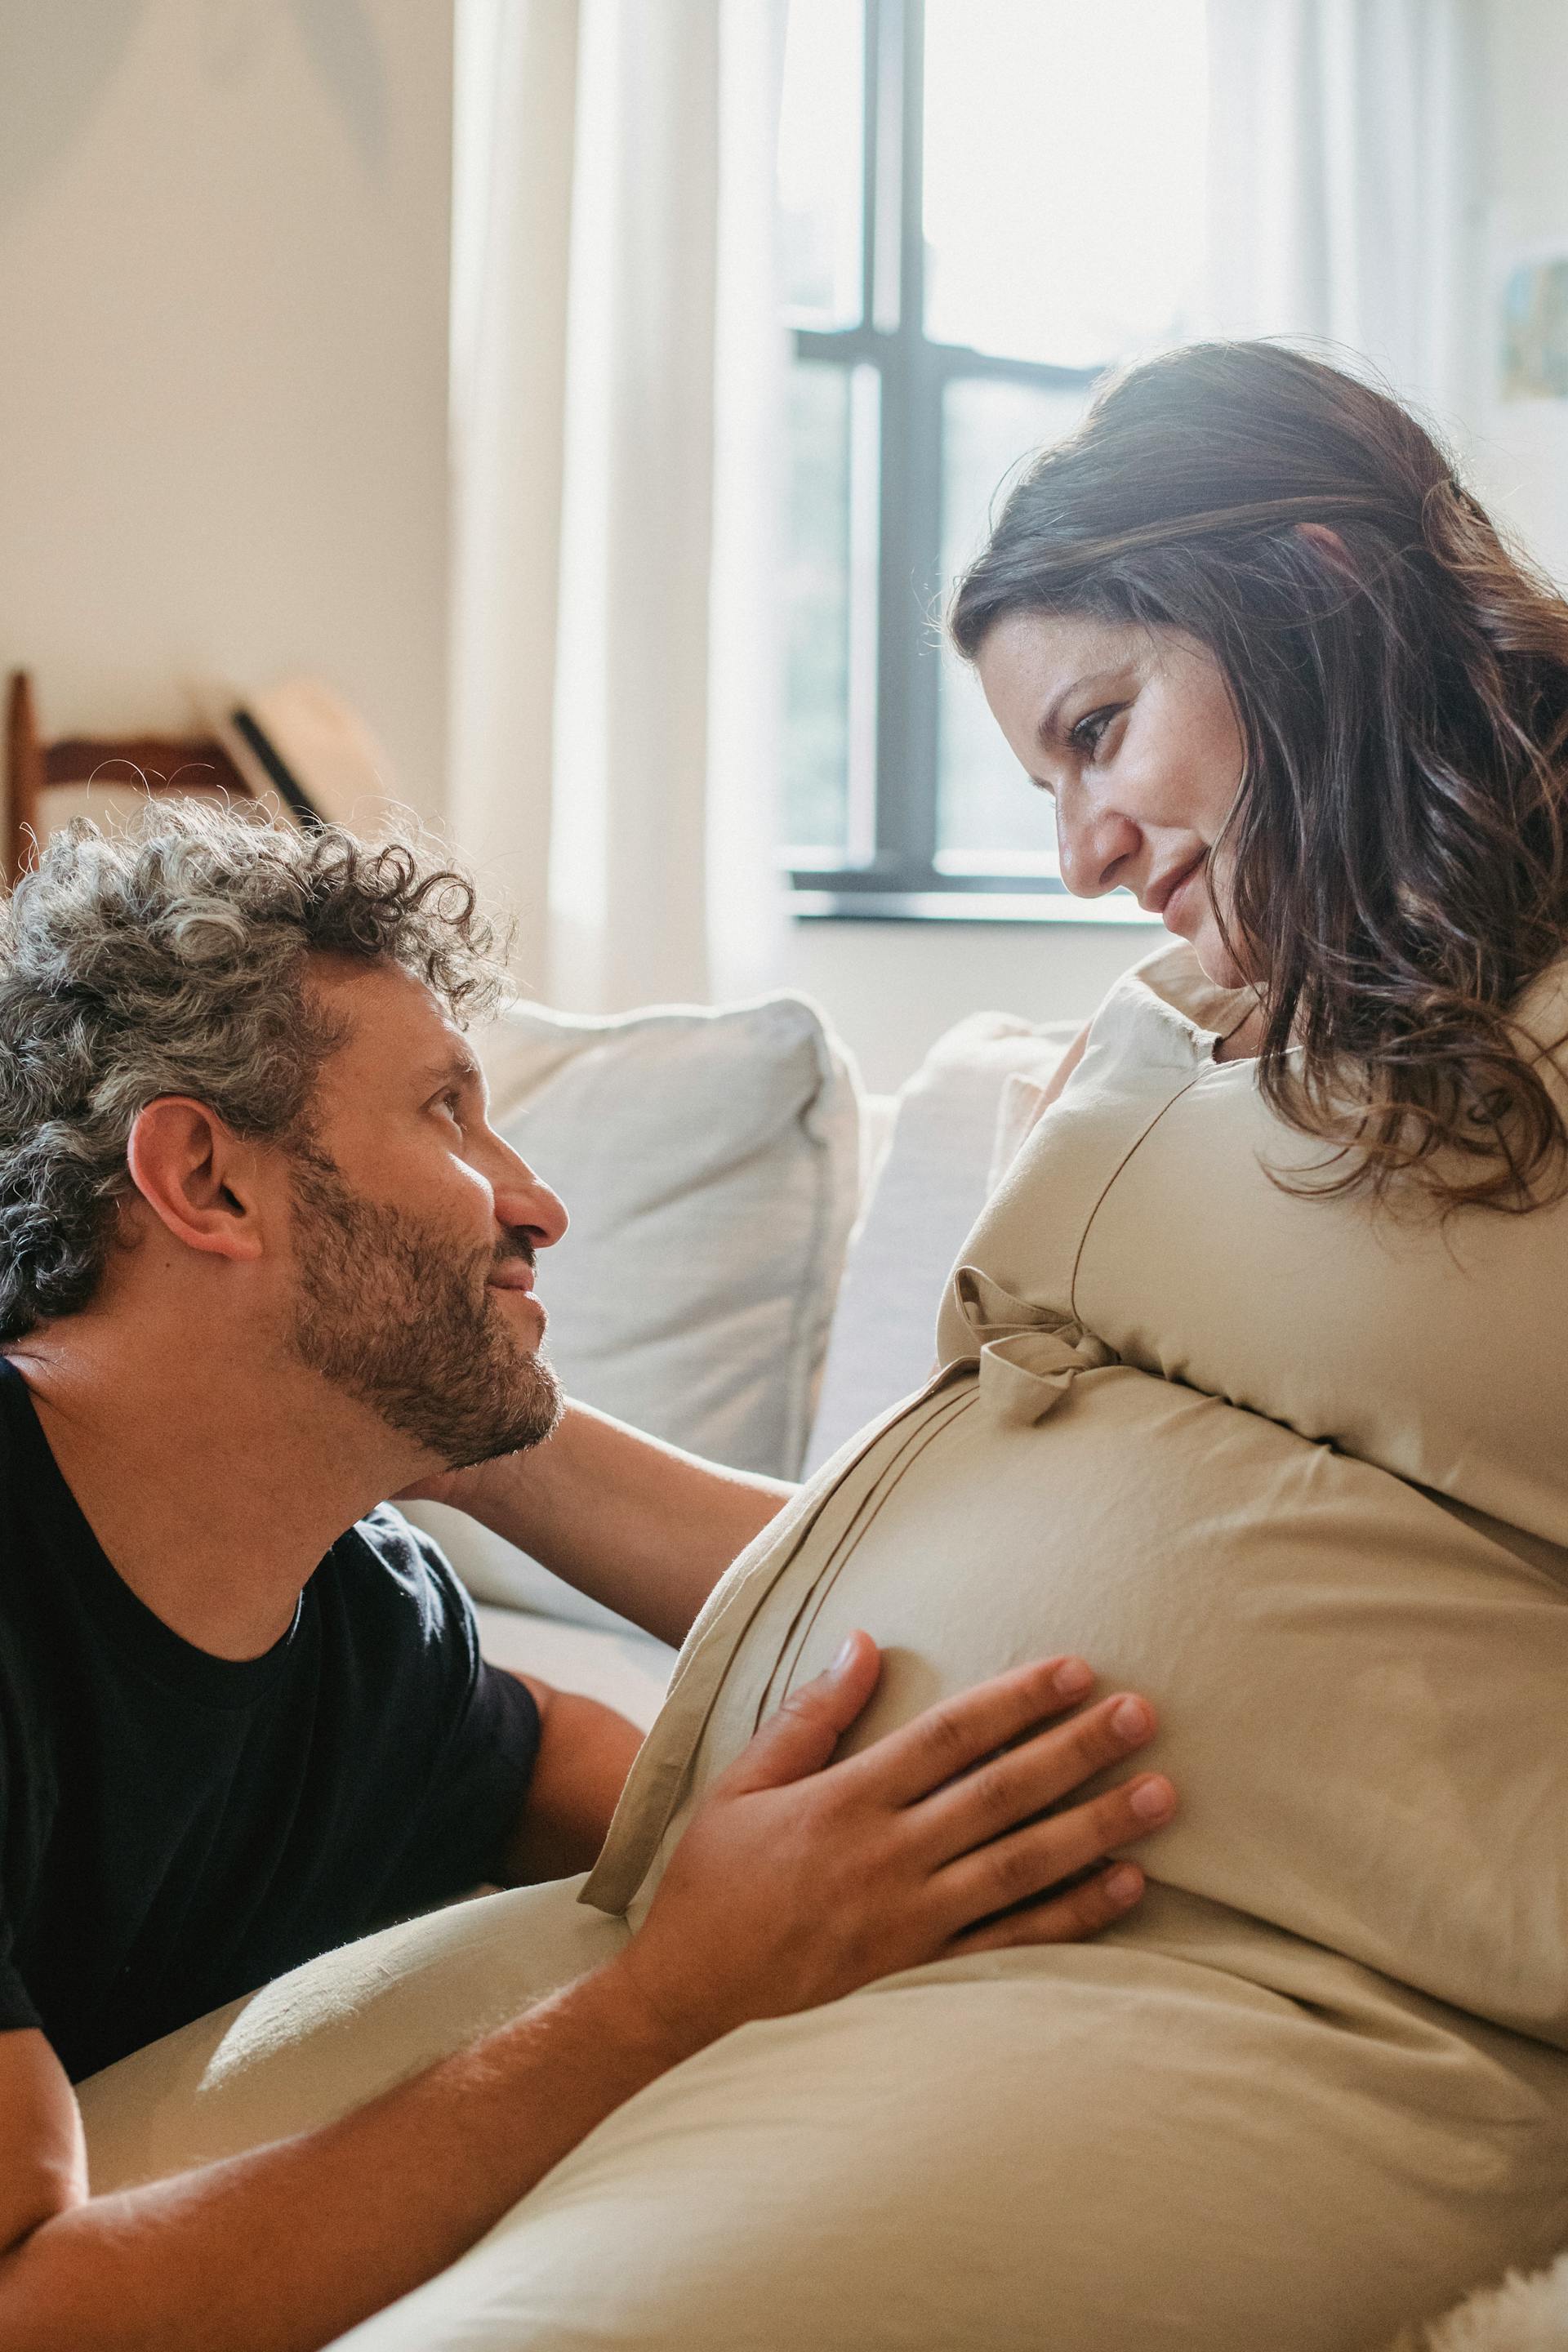 A pregnant couple looking at each other | Source: Pexels